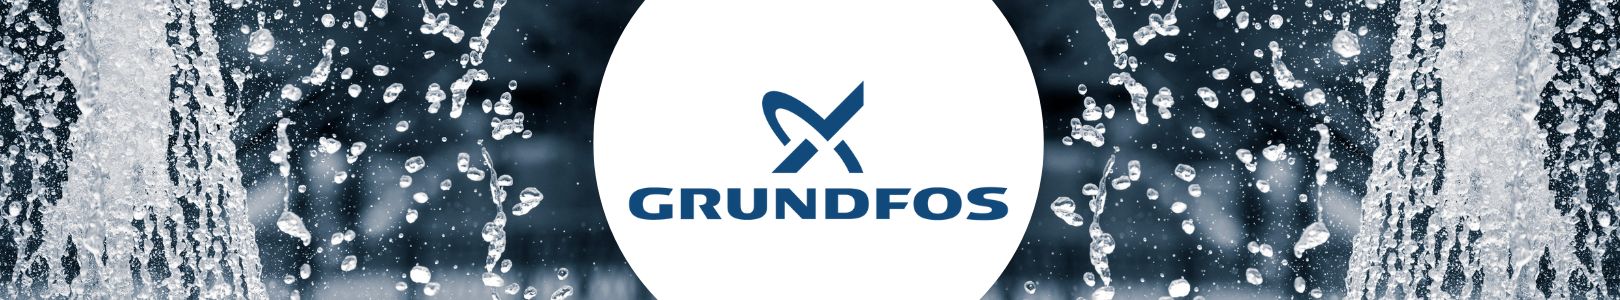 <p style="text-align: center;">For over 35 years Grundfos has designed a range of energy efficient, robust and reliable pumps for applications in domestic, commercial and industrial water use.</p>
<p style="text-align: center;">With a tried and true reputation, Grundfos pumps help many, from farmers who need reliable water in paddocks, to miners who need constant supply and pressure to maintain production, to the residents of houses, offices and apartments who&rsquo;ve come to enjoy a clean and steady water supply.</p>
<p style="text-align: center;">Irribiz is a proud supplier of Grundfos Pumps.</p>
<p style="text-align: center;">From <strong>Pressure Pumps</strong> to <strong>Circulation Pumps</strong> to <strong>Submersible Pumps</strong>, Irribiz can help size the correct Grundfos pump to suit your application.</p>
<p style="text-align: center;">For more information call 1800 191 138 or email <a href="mailto:online@irribiz.com.au" target="_blank" rel="noopener">online@irribiz.com.au</a>.</p>